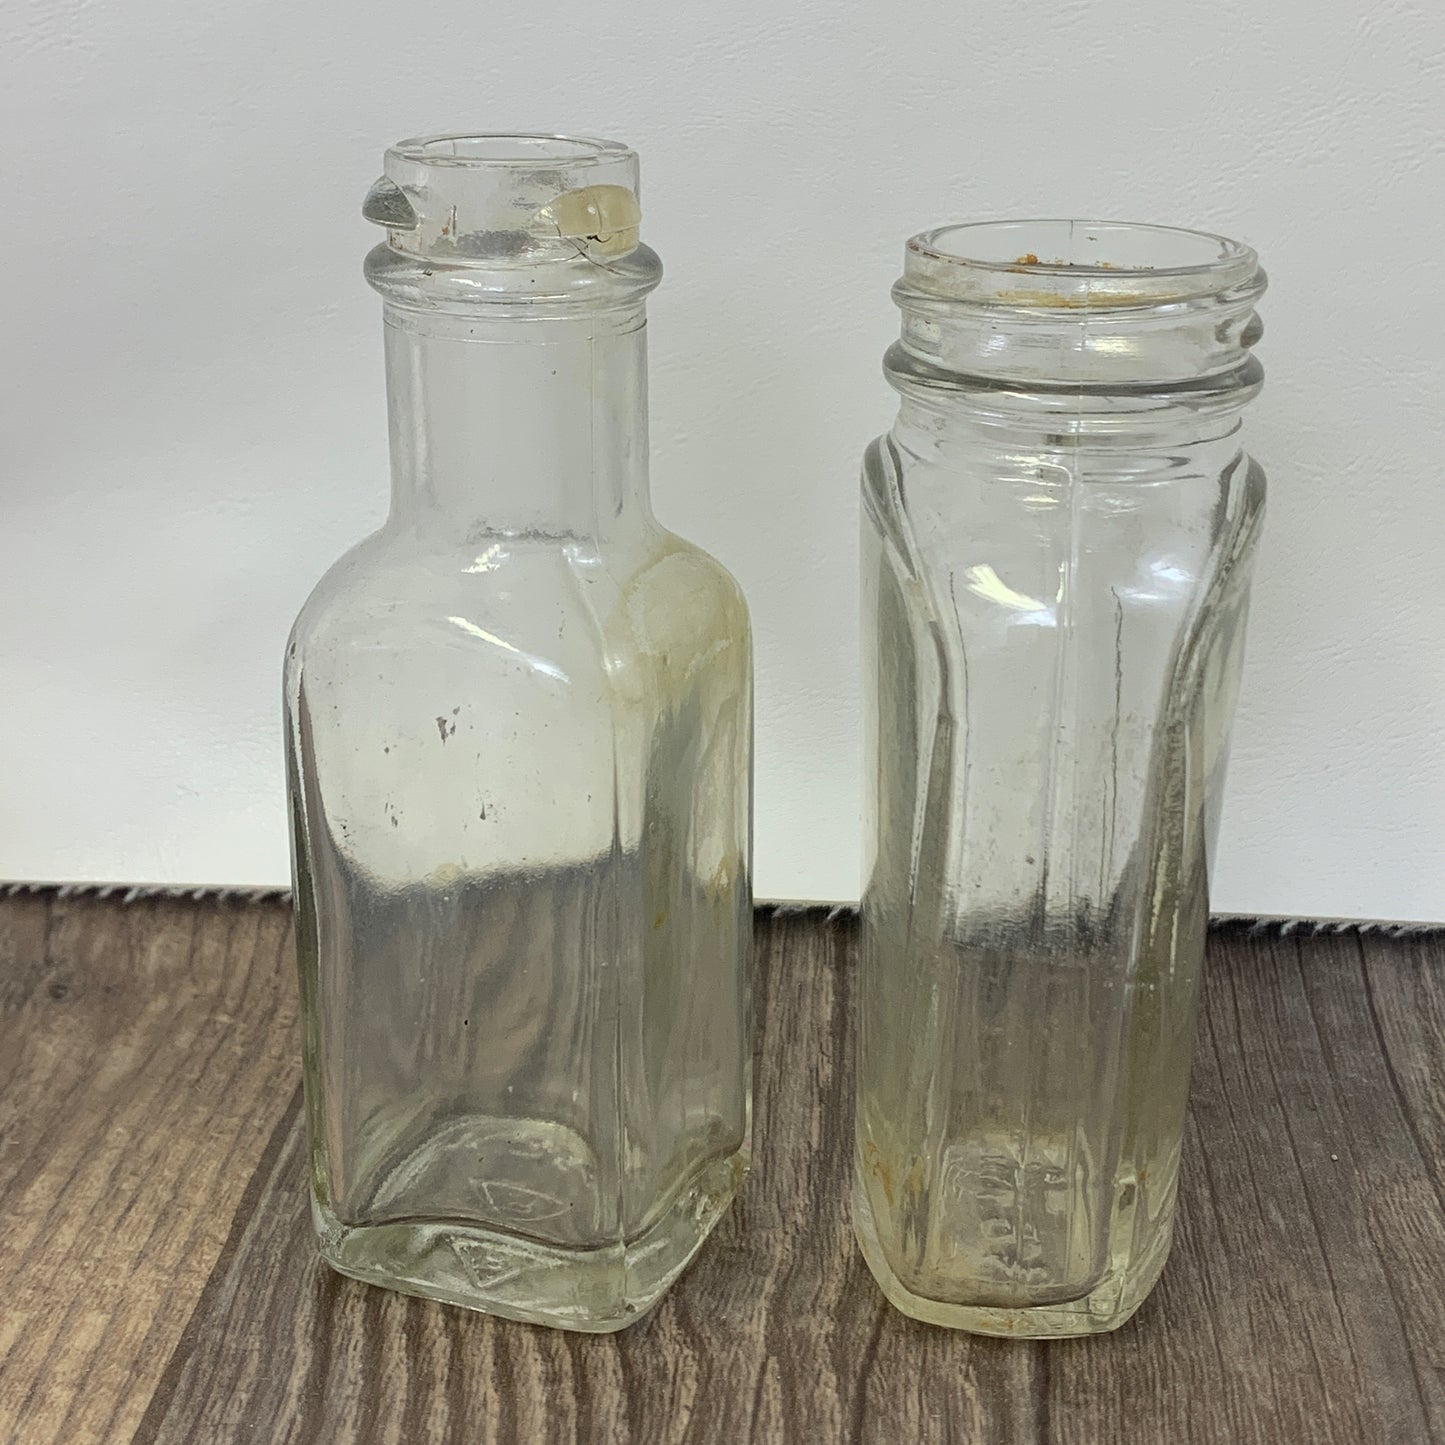 Vintage Bottles Instant Collection Set of 9 Vintage Farmhouse Collectible Bottles Apothecary Bottles